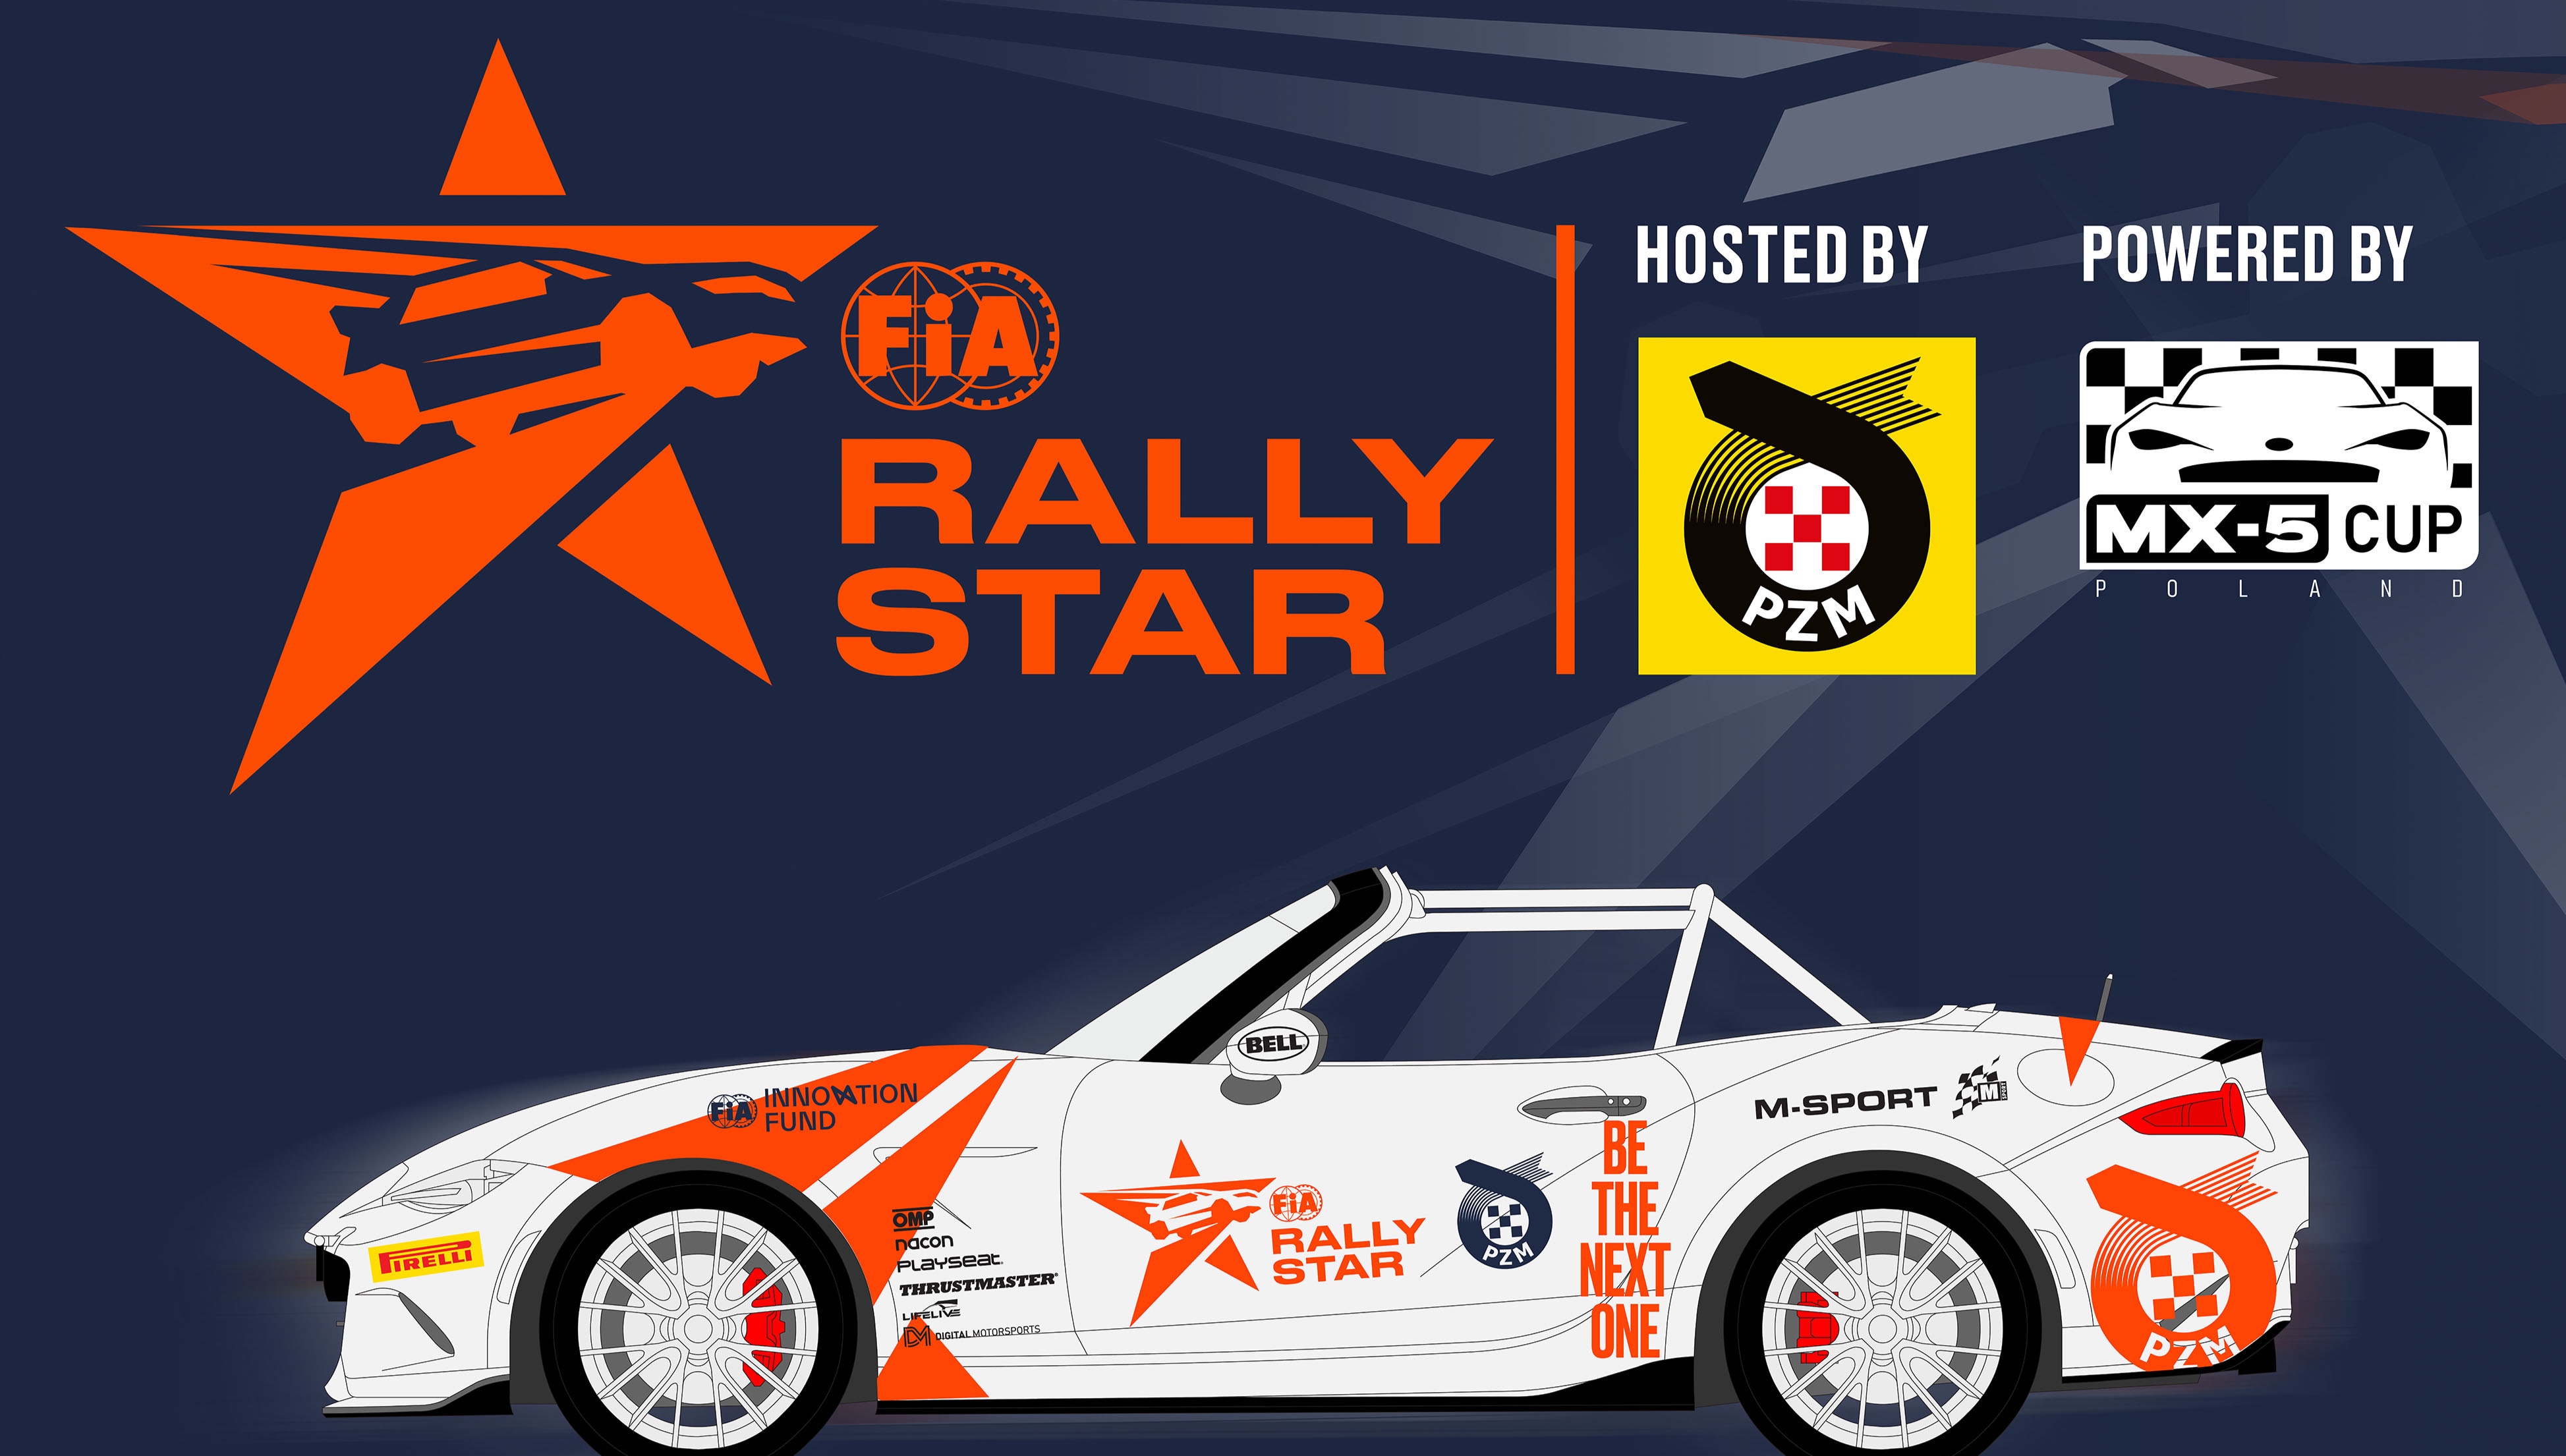 FIA Rally Star in Poland - you can still take part